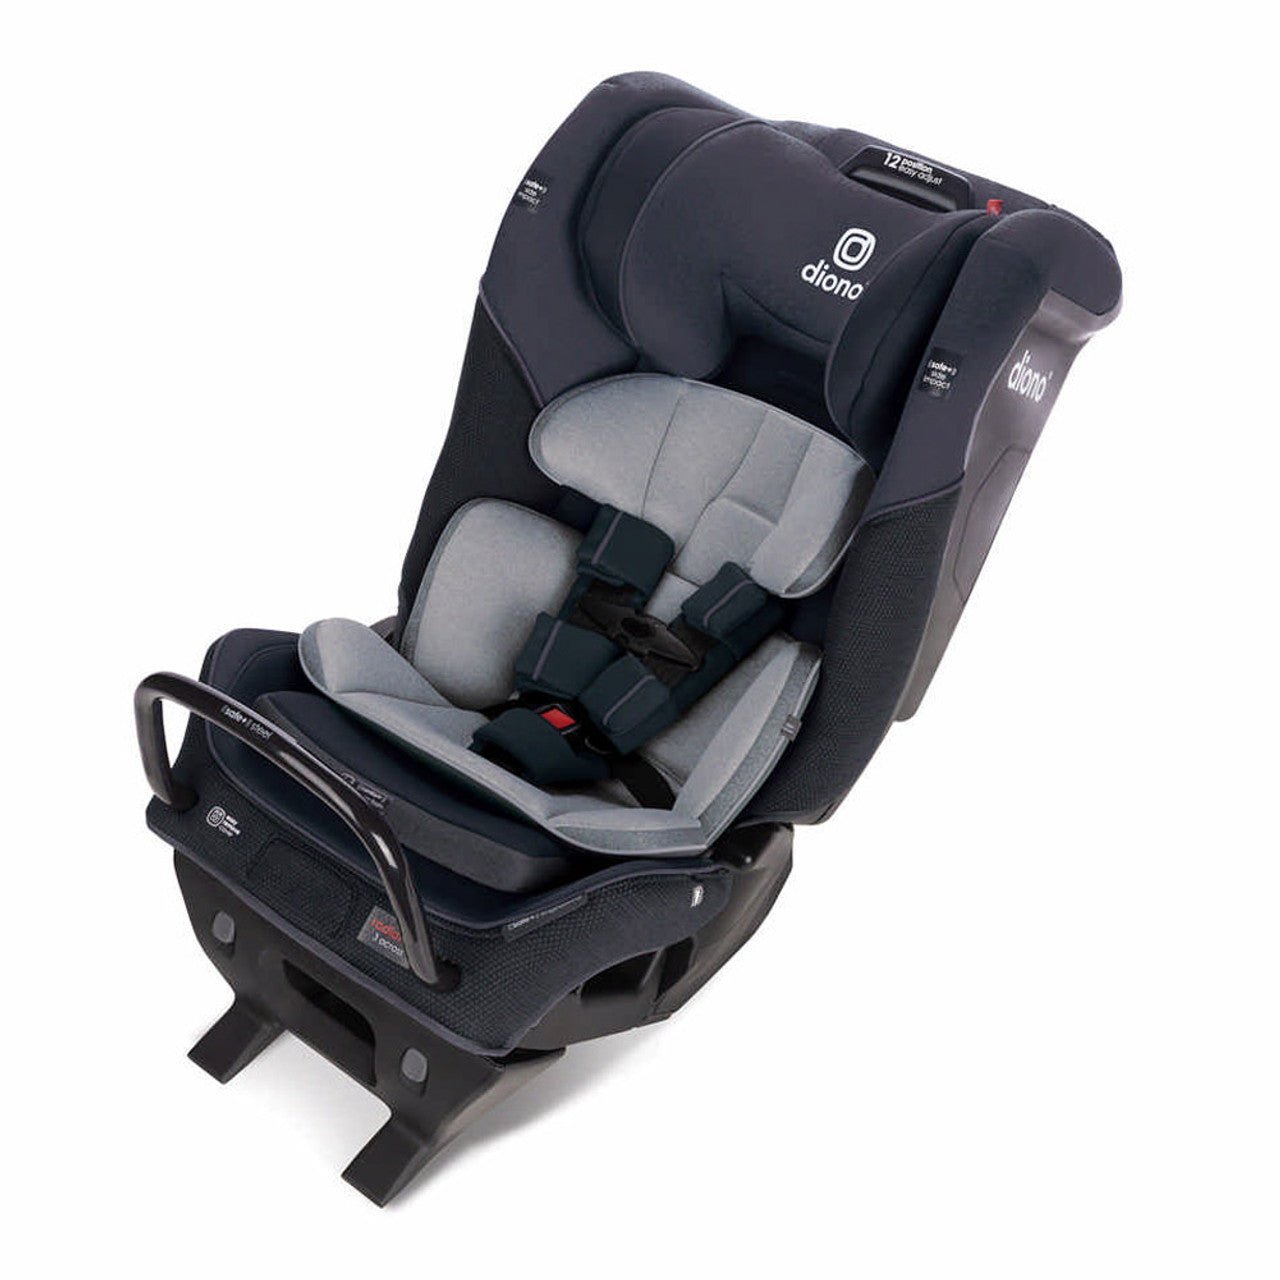 DIONO Radian 3QX Latch All in One Convertibles Car Seat, -- ANB Baby